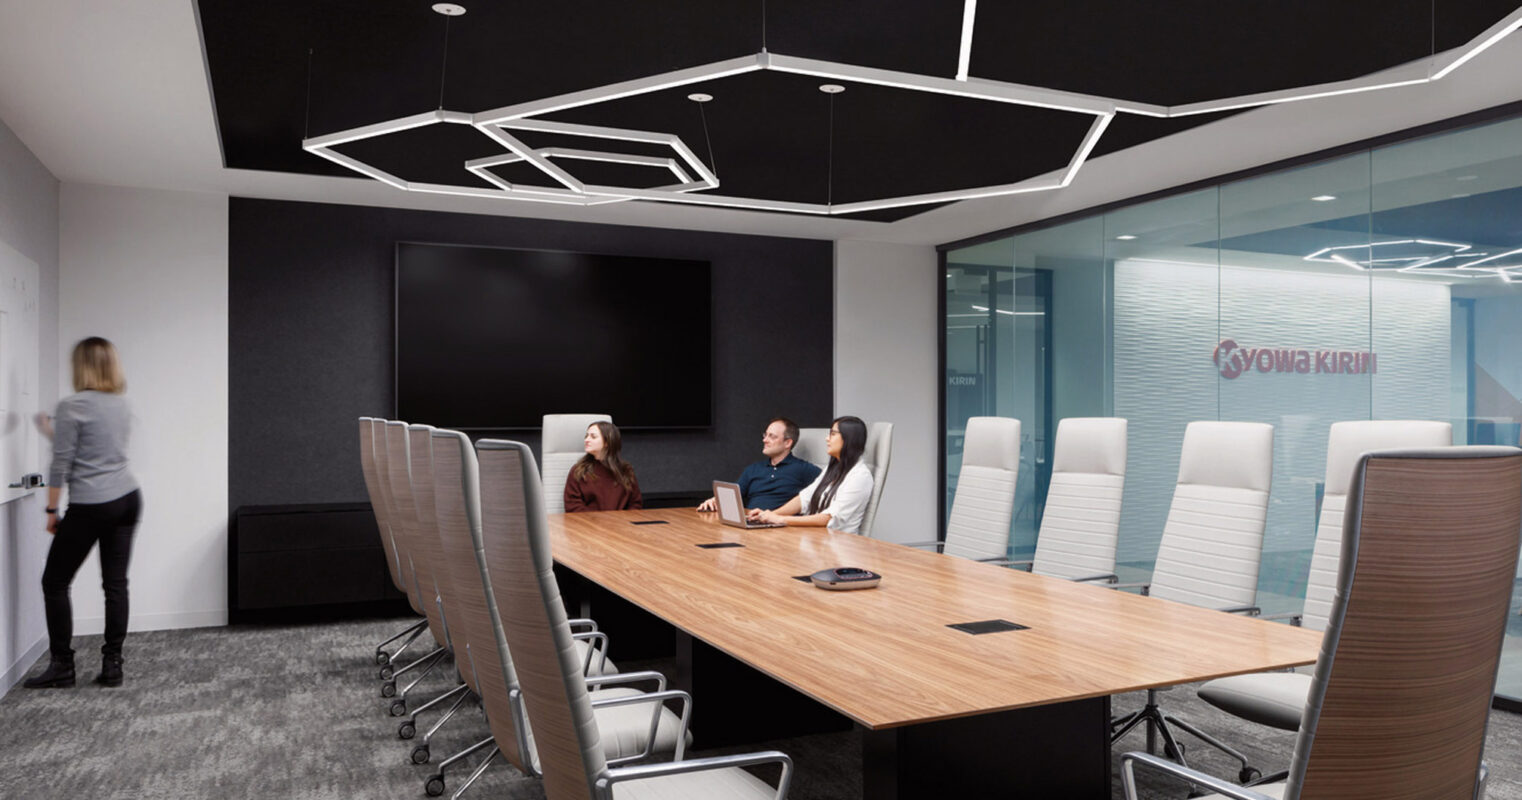 Contemporary boardroom featuring an elongated wooden table with surrounding mesh-back chairs, angular overhead lighting elements, and glass walls providing a glimpse into the adjacent office.